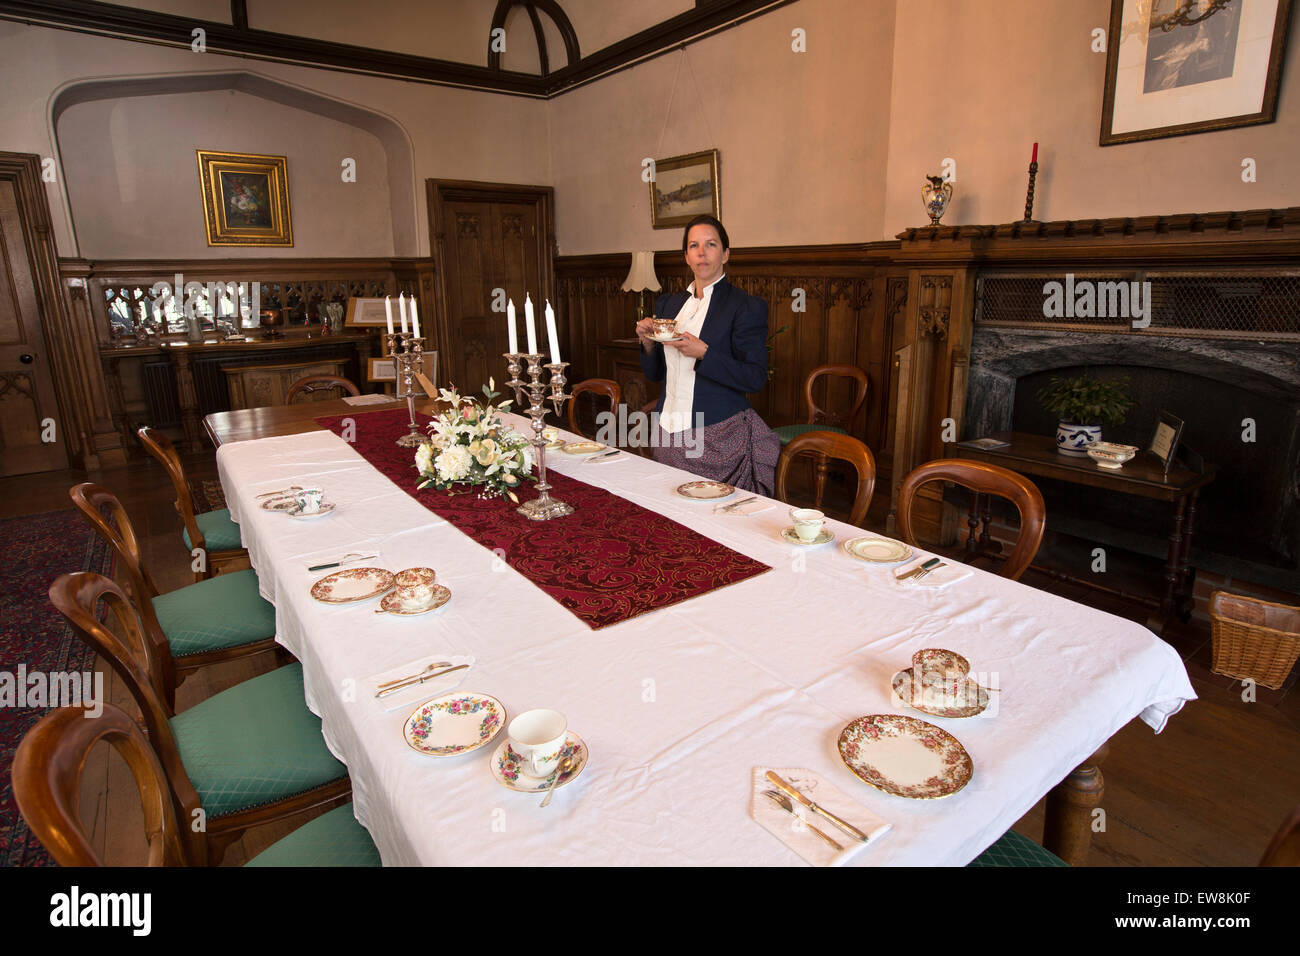 Ireland, Co Wexford, Ballyedmond, Wells House, Louise Cullen as Lady Frances in the Dining Room Stock Photo